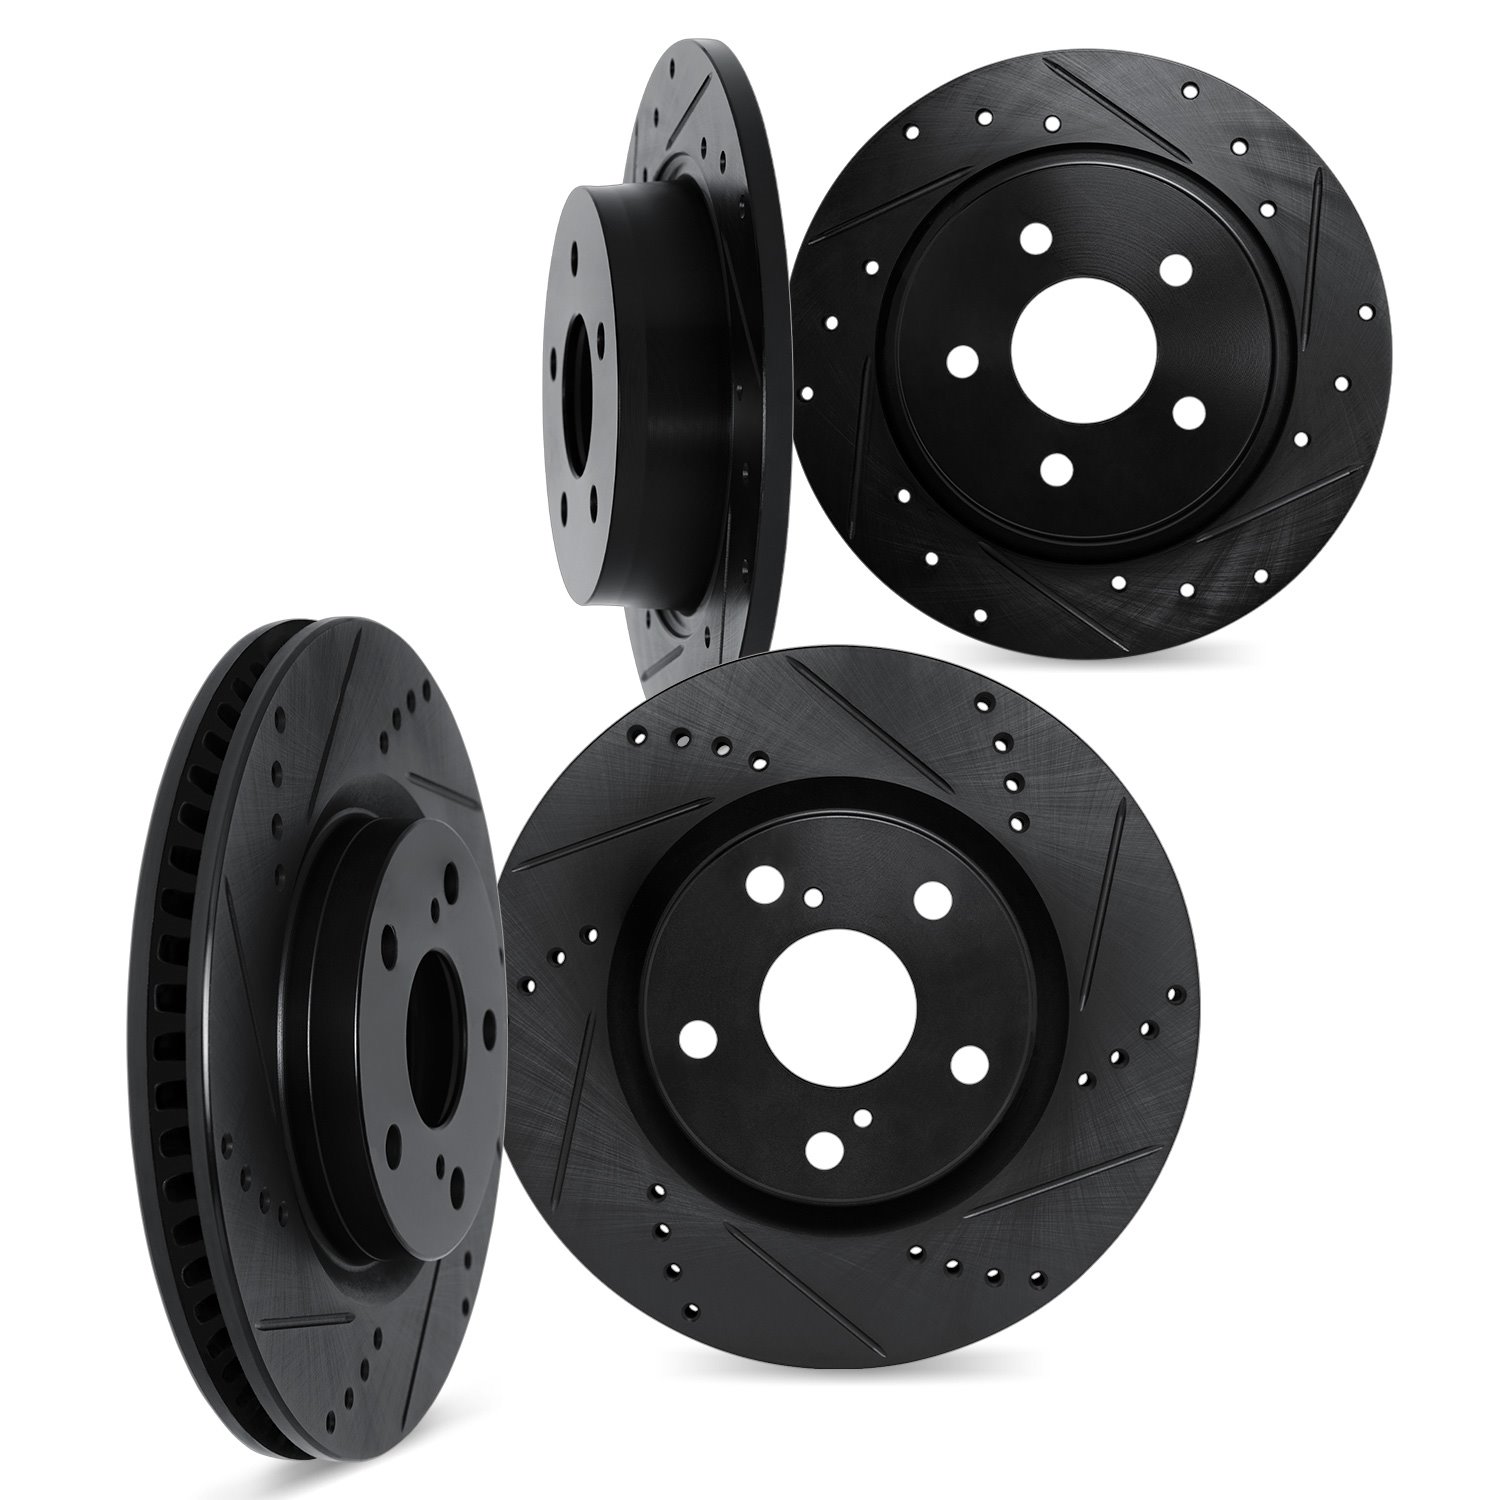 8004-72054 Drilled/Slotted Brake Rotors [Black], 2004-2012 Mitsubishi, Position: Front and Rear